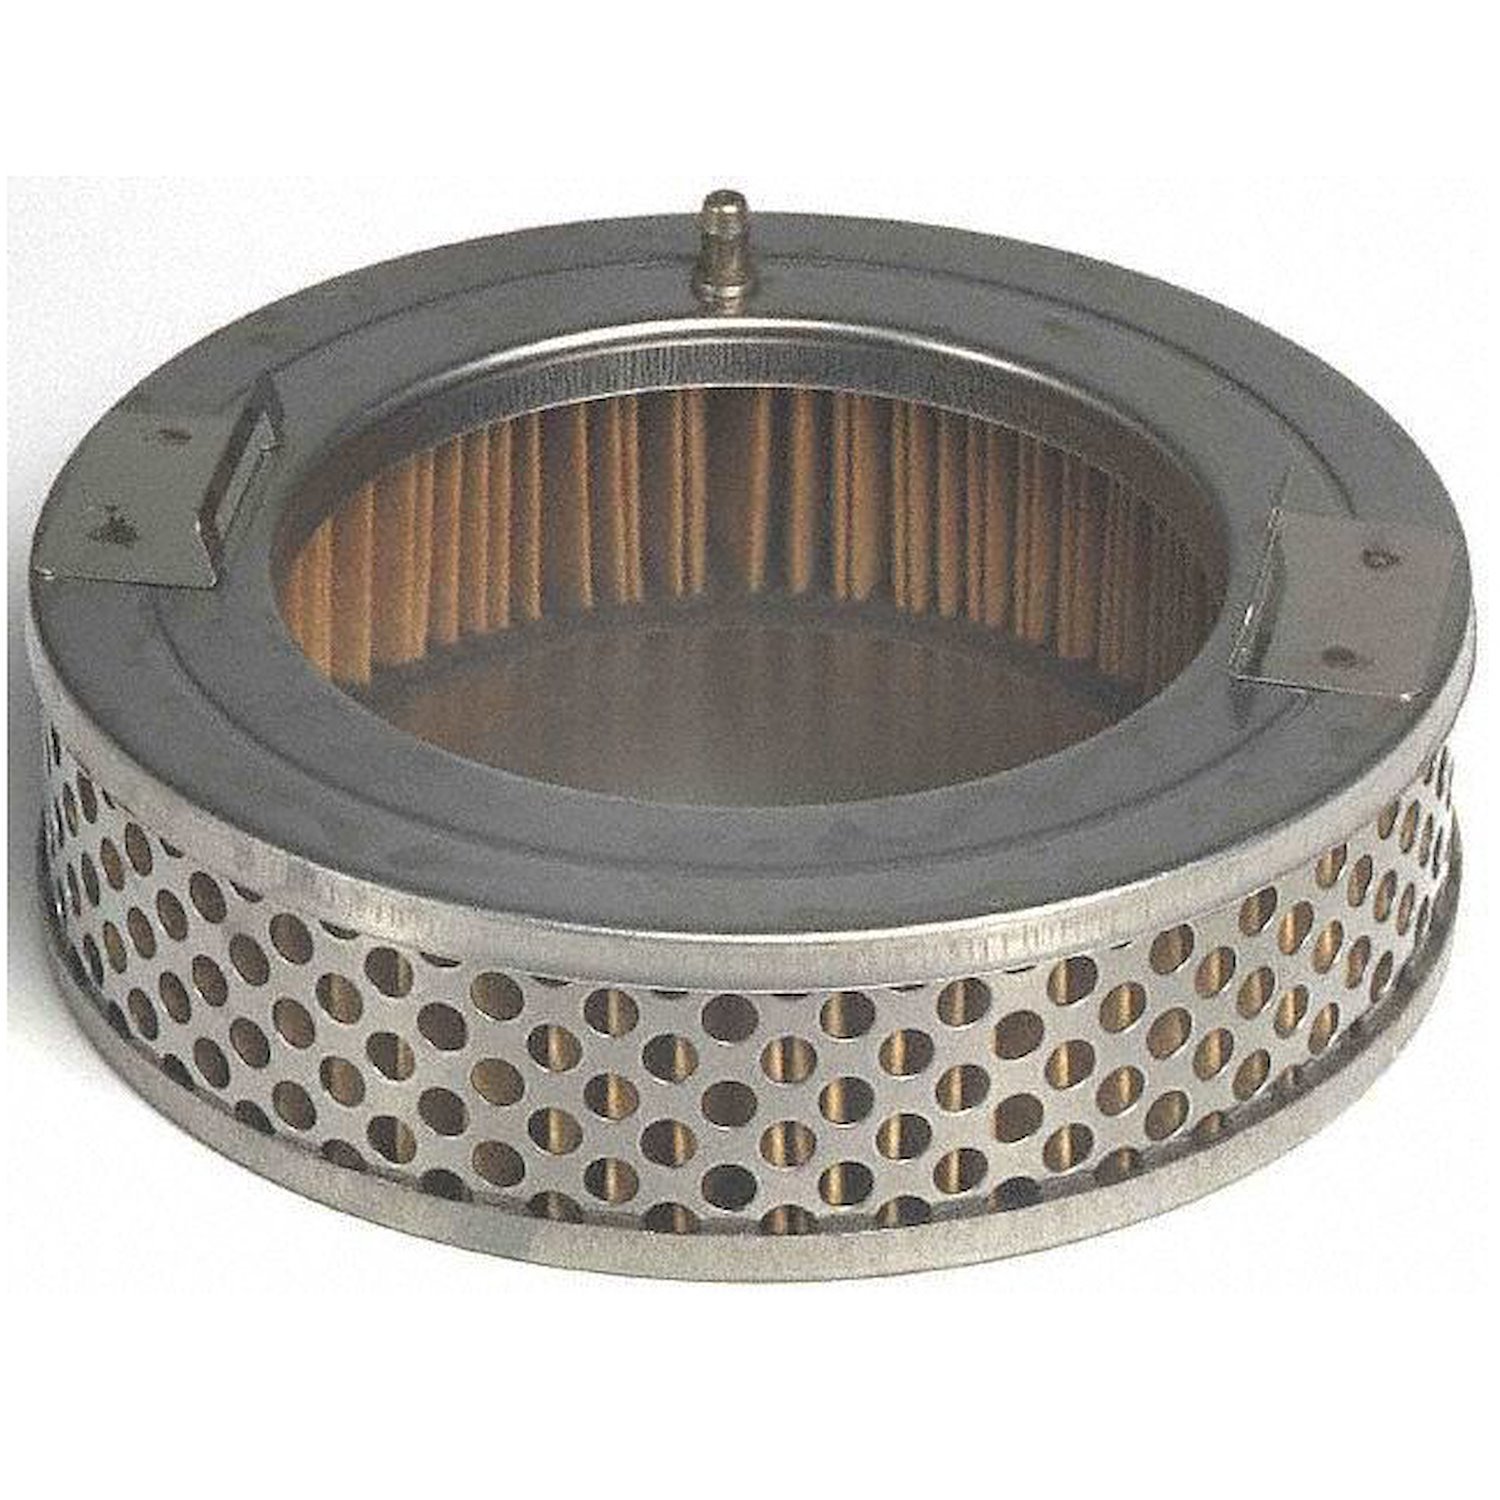 Fuel Pump Strainer for 1991-1996 Chrysler/Dodge/Eagle/Plymouth